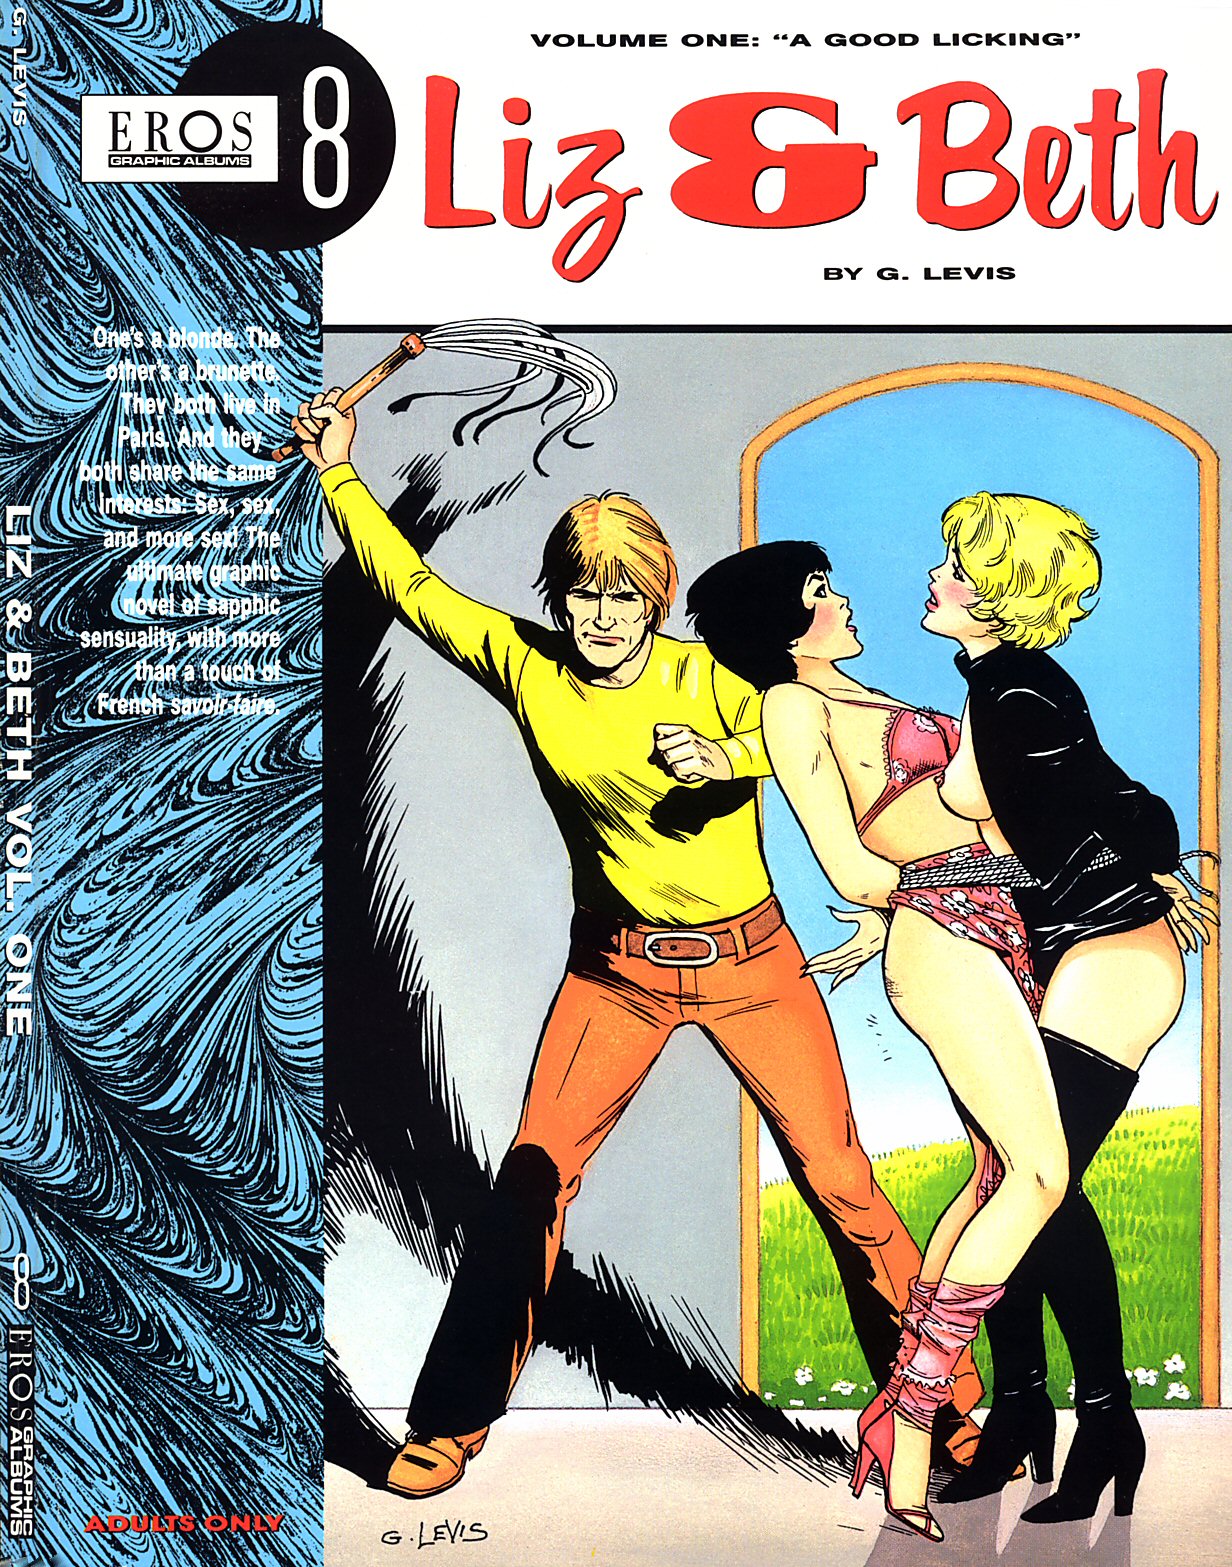 [G. Levis] Liz and Beth #1: A Good Licking [English] 